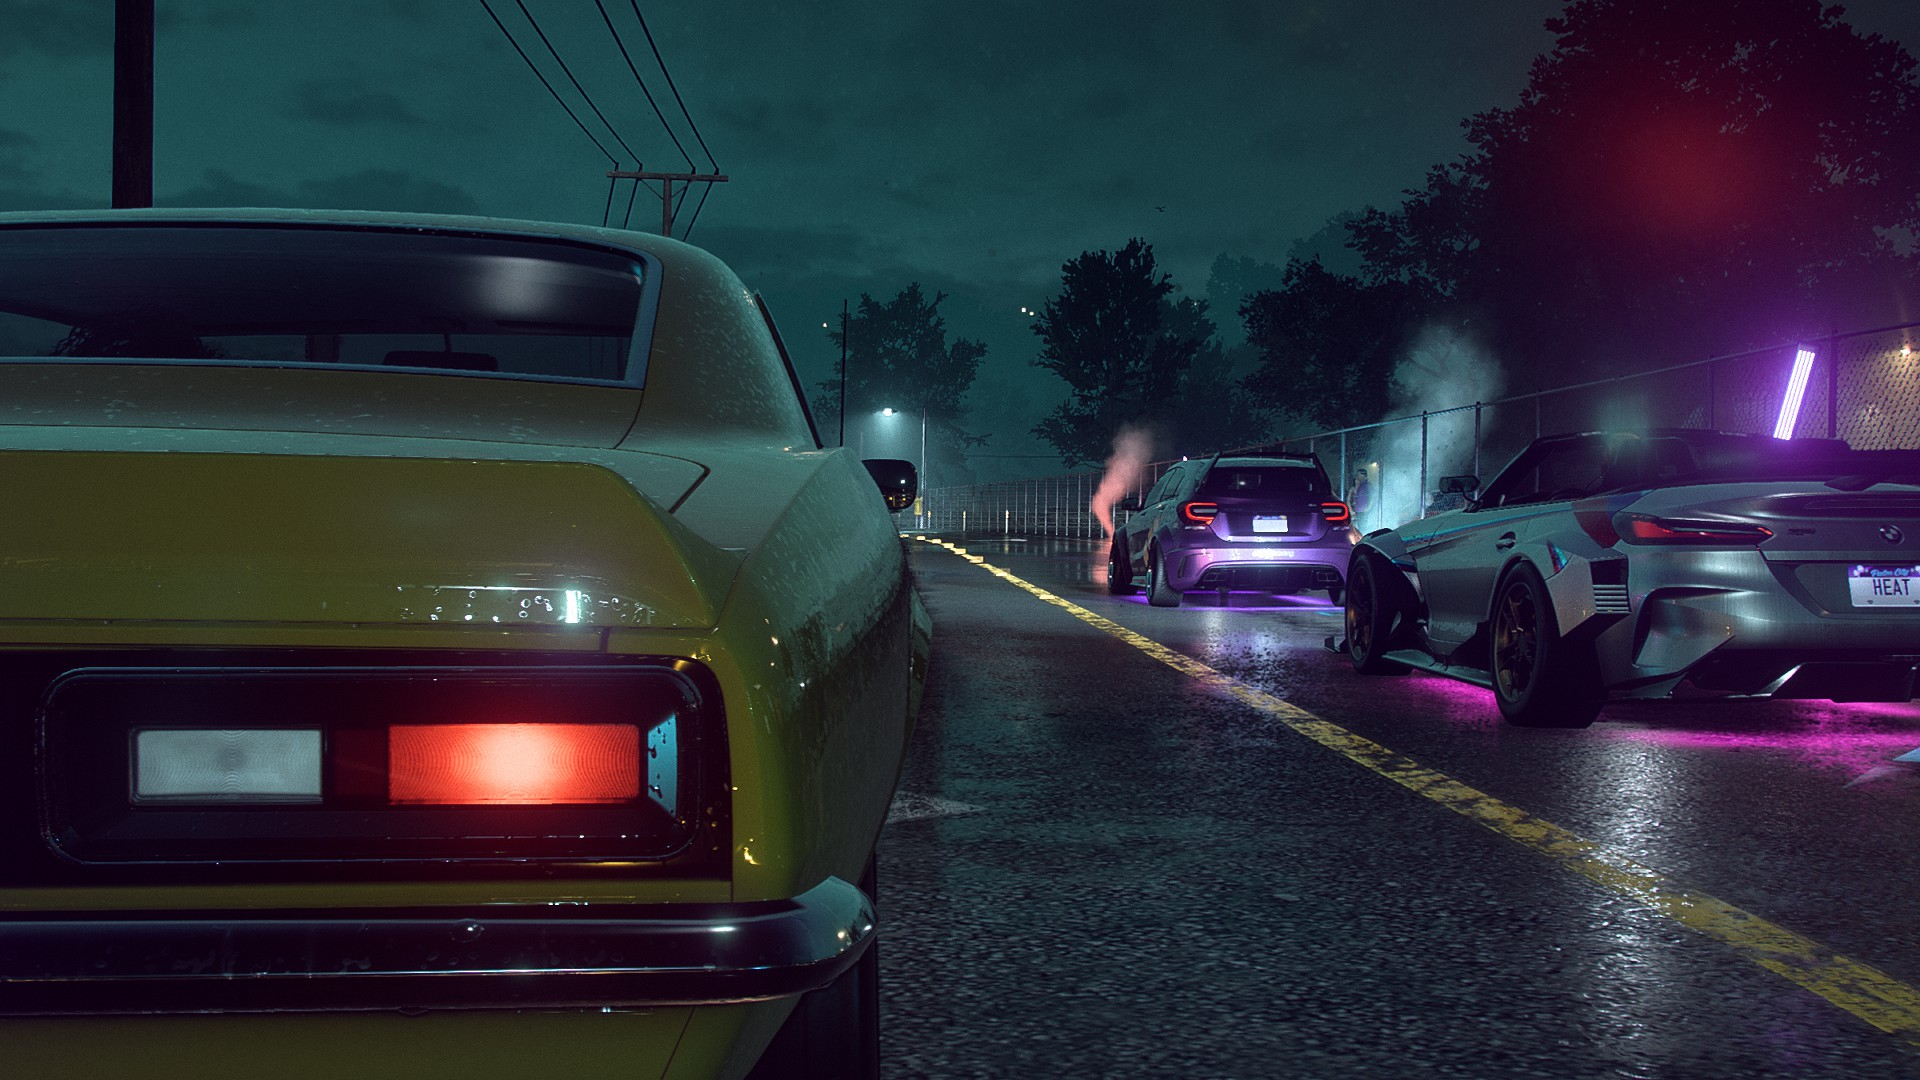 1920x1080 Wallpaper : Need for Speed, car, race cars, night, street racing aic9182 1885541 HD Wallpapers